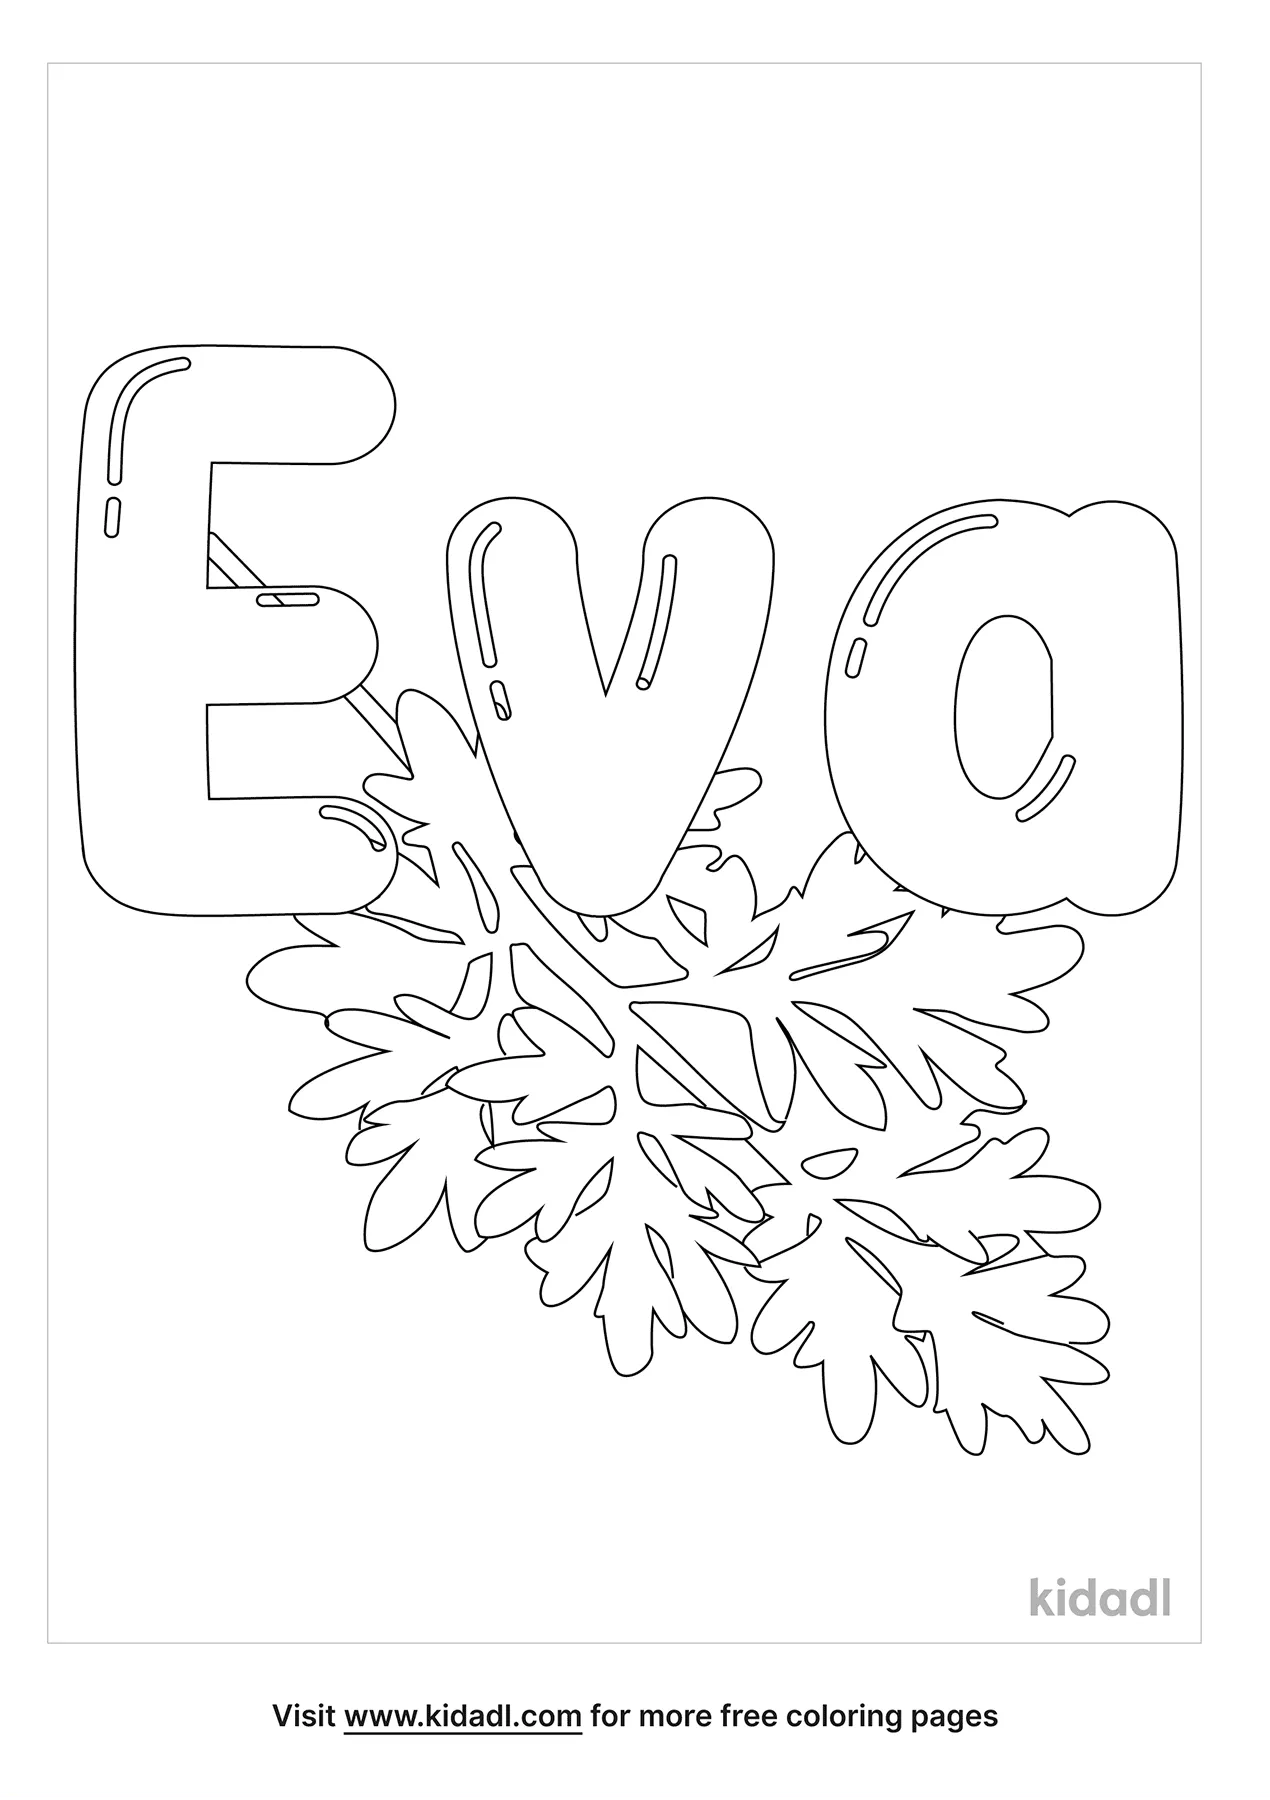 Eva The Word Coloring Page